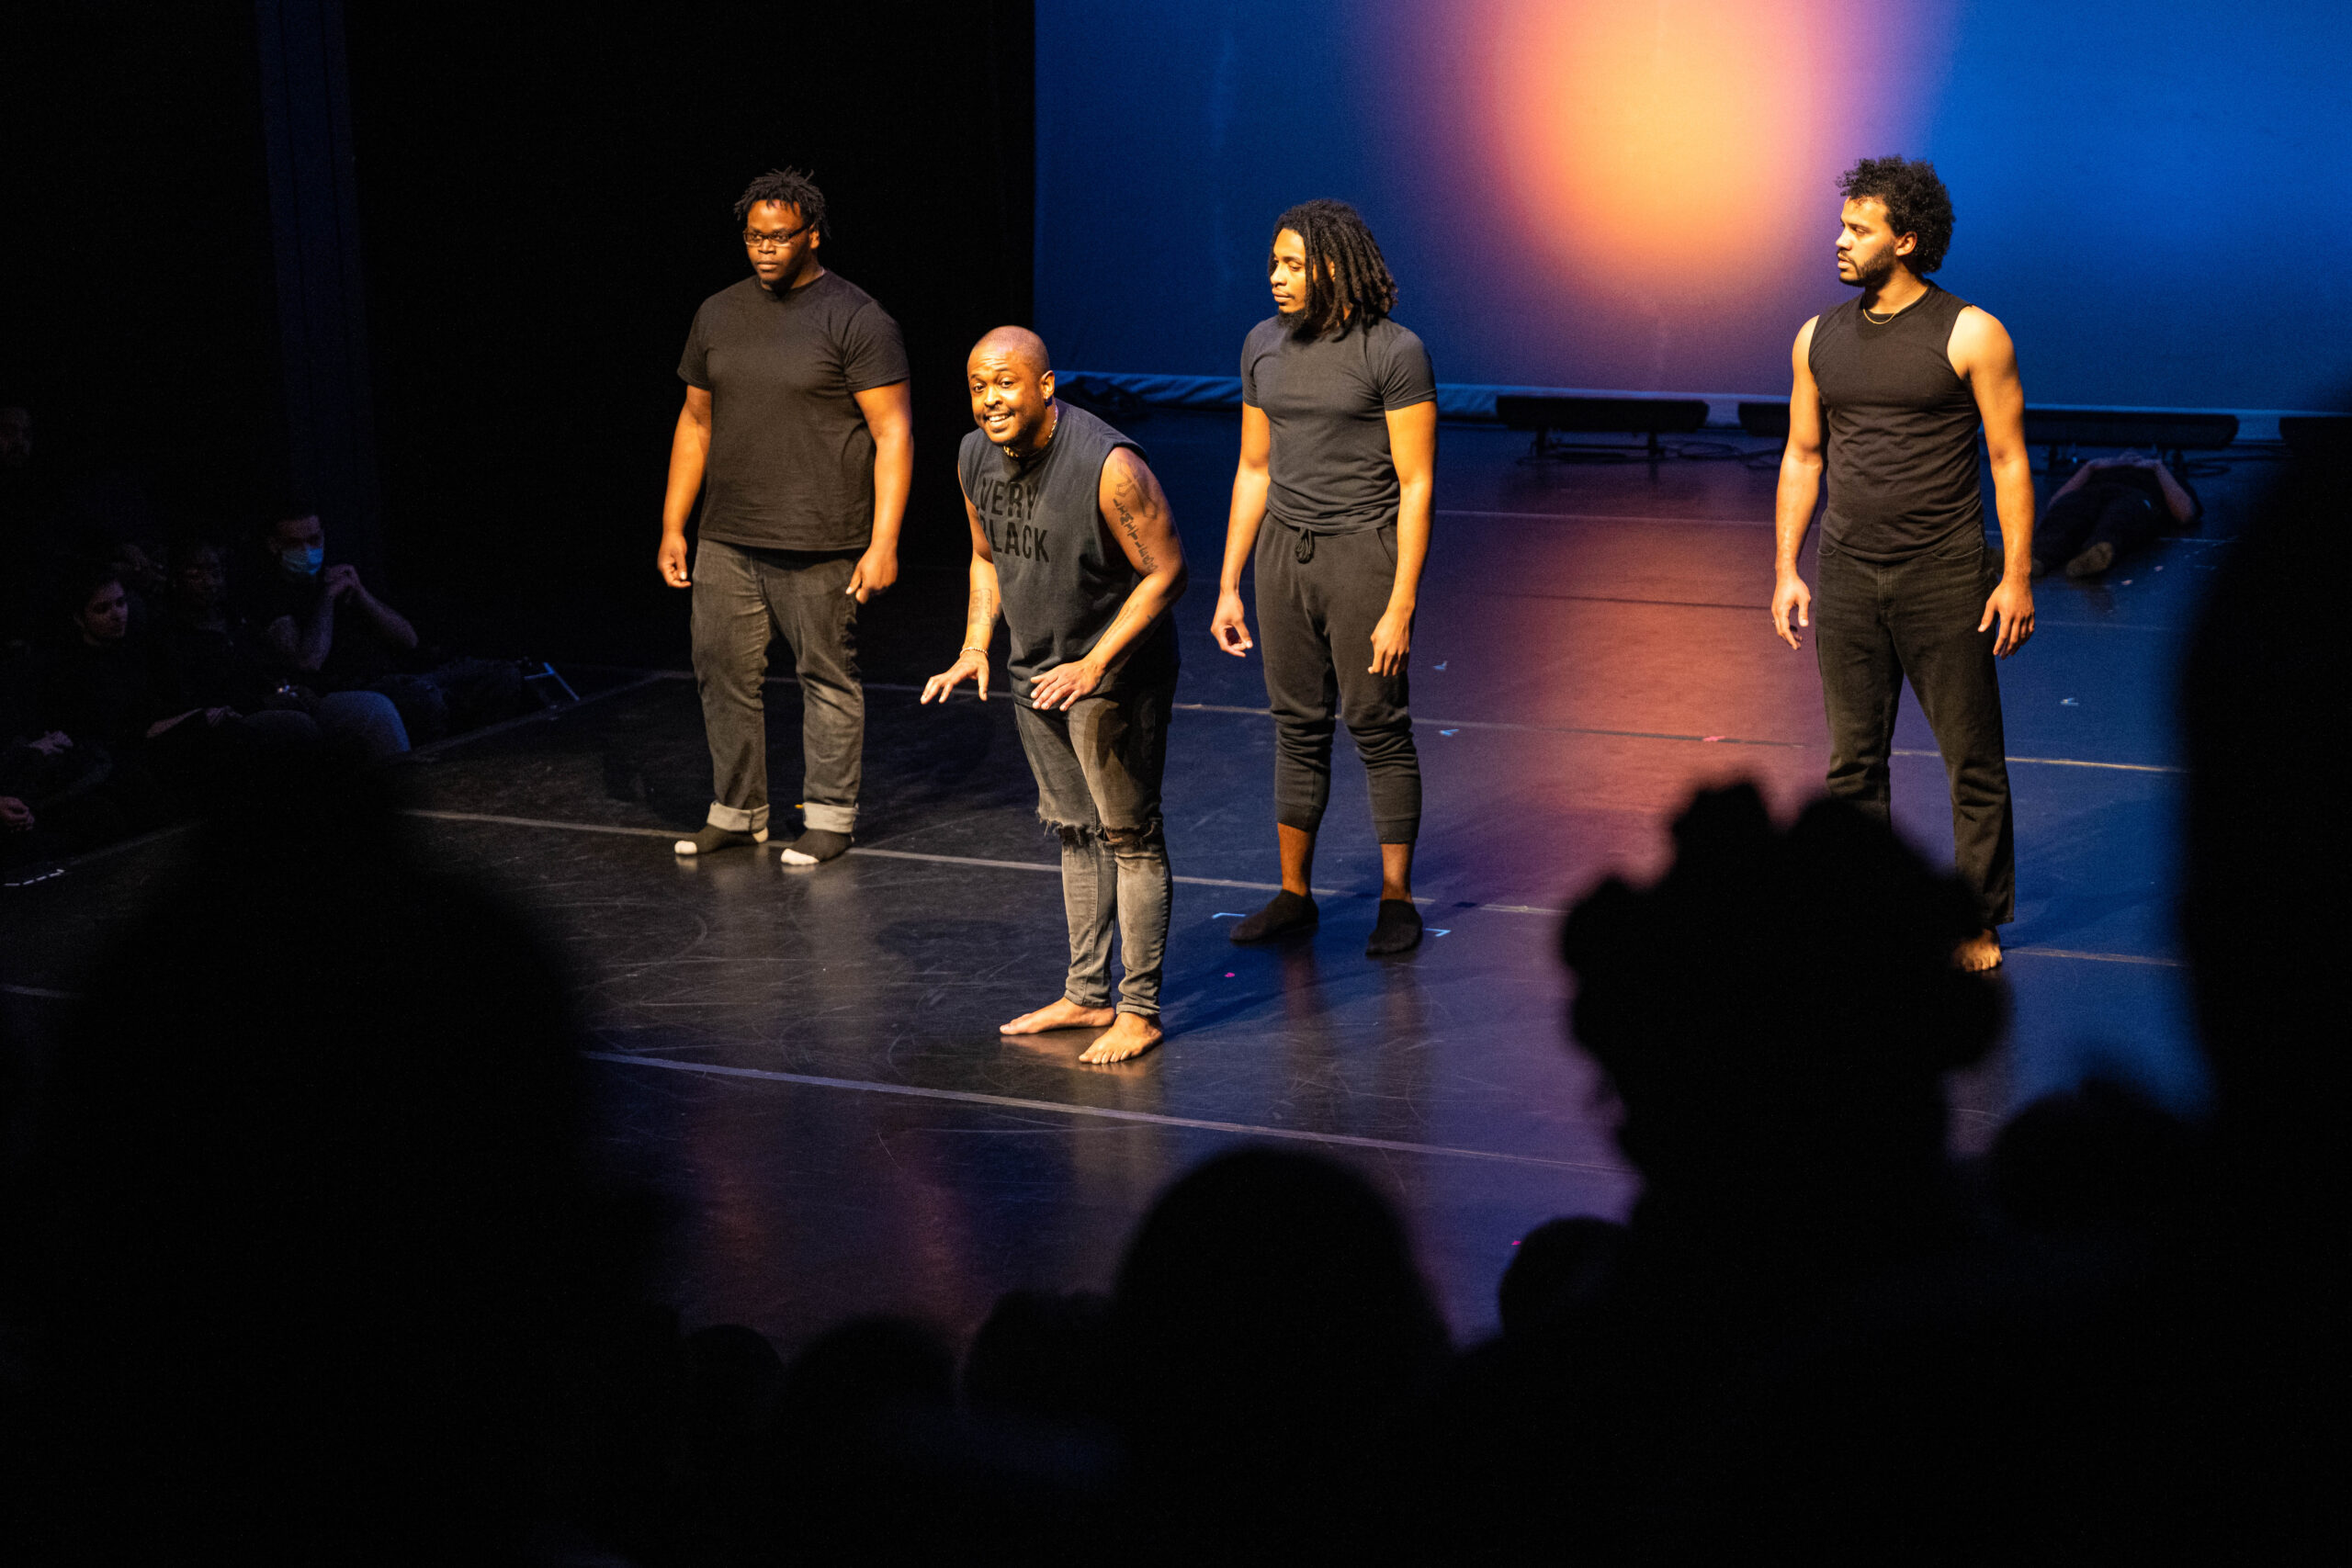 A group of performers dressed in black on stage.